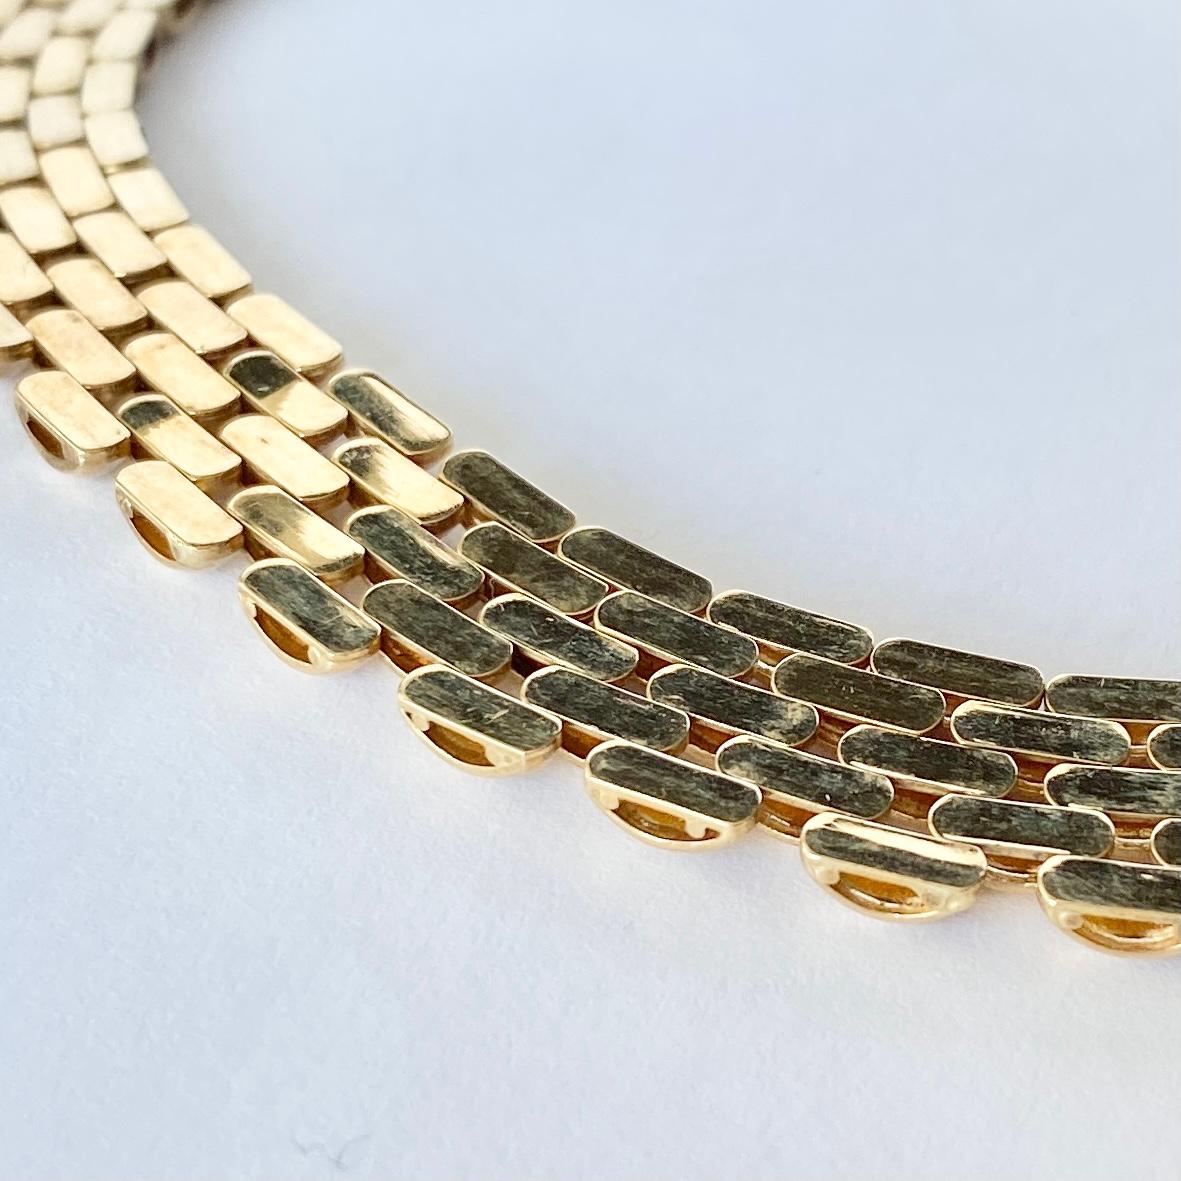 This beautiful vintage 9ct gold collar is flat and sits beautifully. It is fastened using a simple clasp.

Length: 43.4cm
Chain Width: 11.5mm 

Weight: 37g